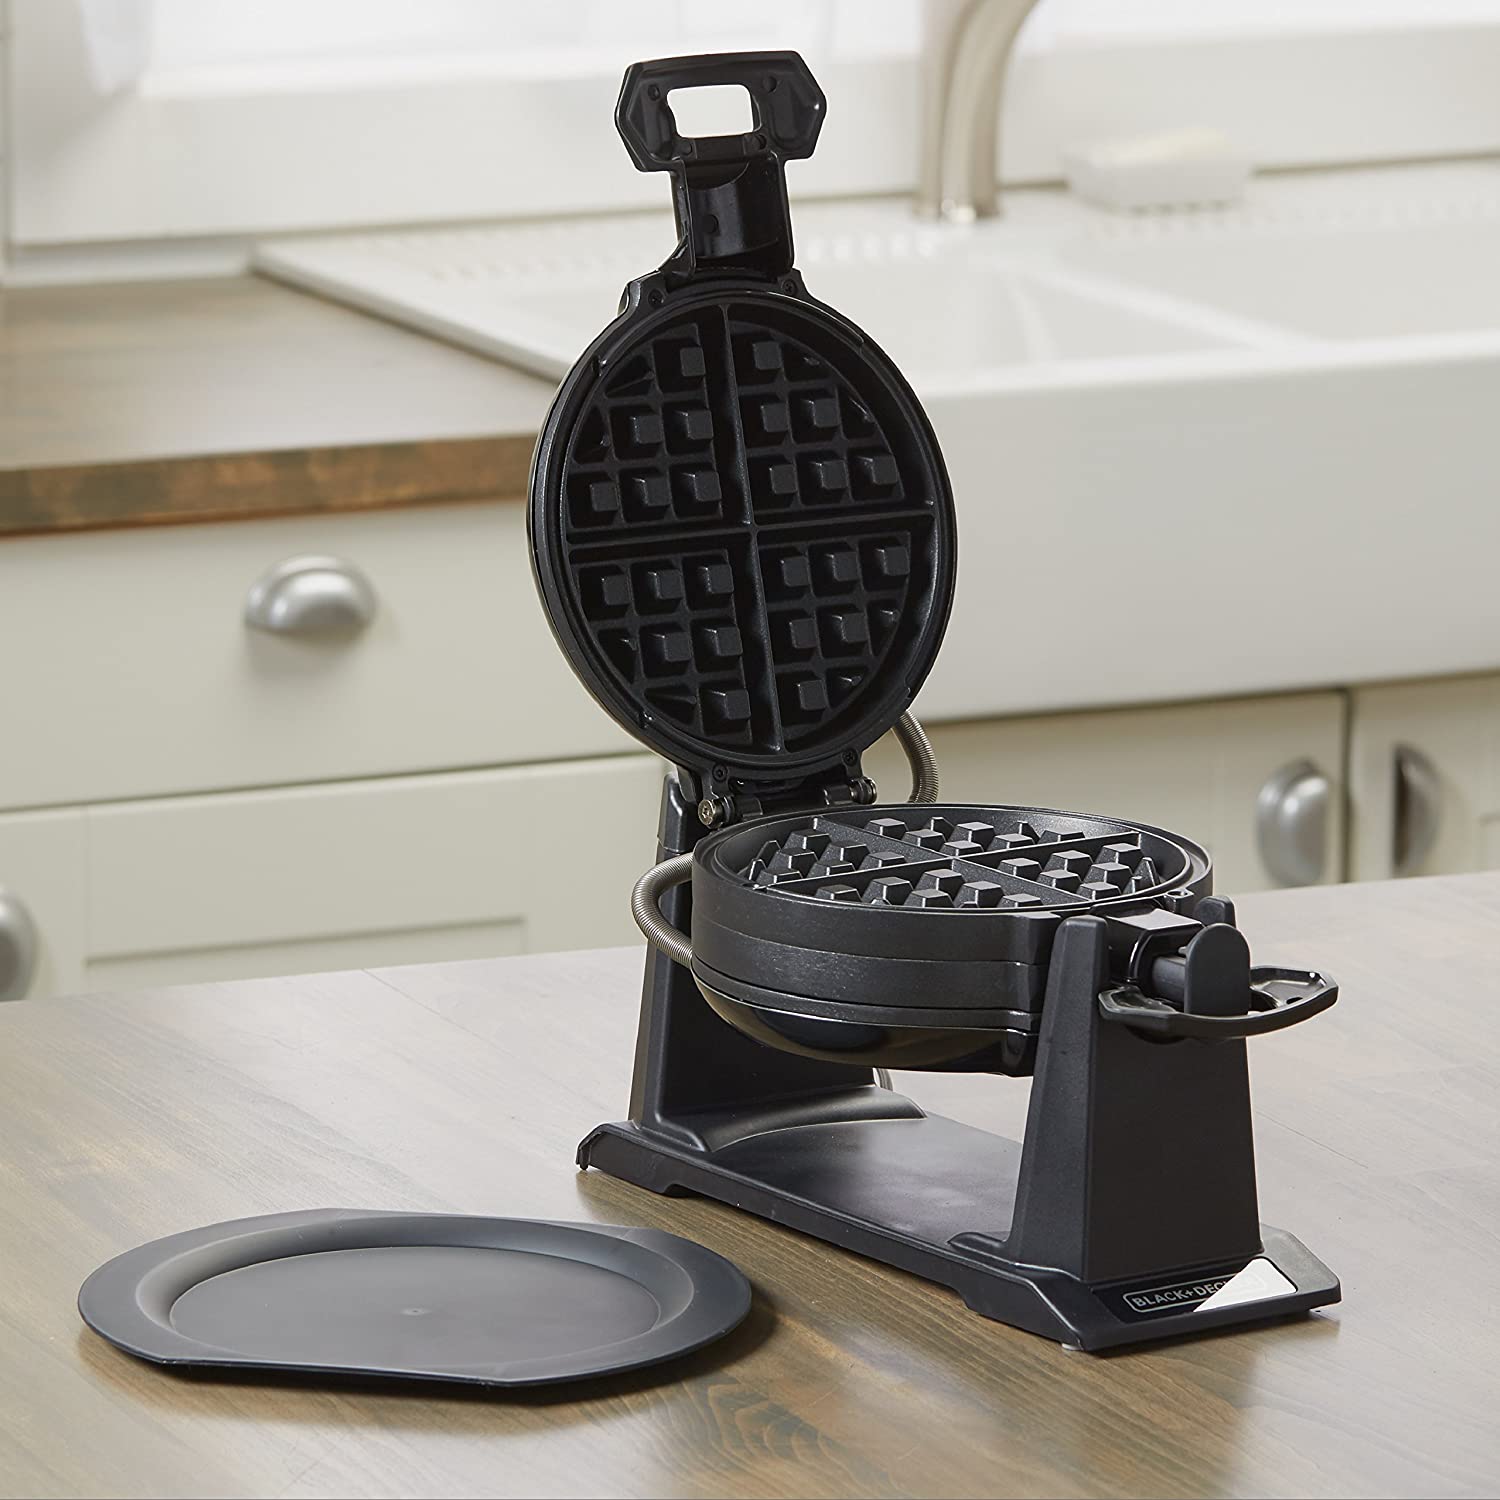  BELLA Classic Rotating Belgian Waffle Maker with Nonstick  Plates, Removable Drip Tray, Adjustable Browning Control and Cool Touch  Handles, Black: Electric Waffle Irons: Home & Kitchen